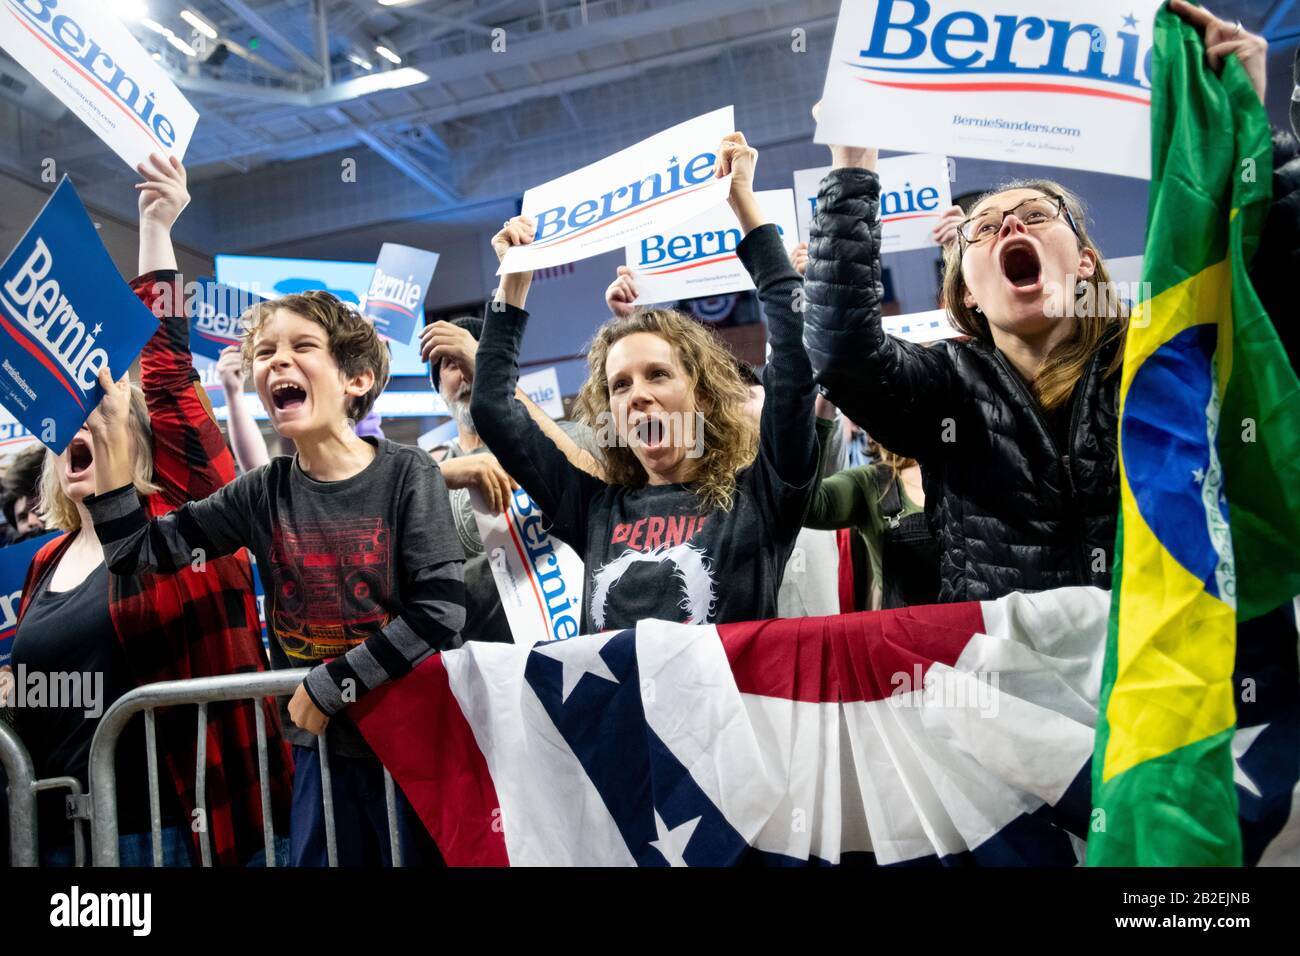 Spartanburg, USA. 27th Feb, 2020. Supporters of Democratic presidential candidate Bernie Sanders at campaign rally at Wofford in South Carolina. Stock Photo